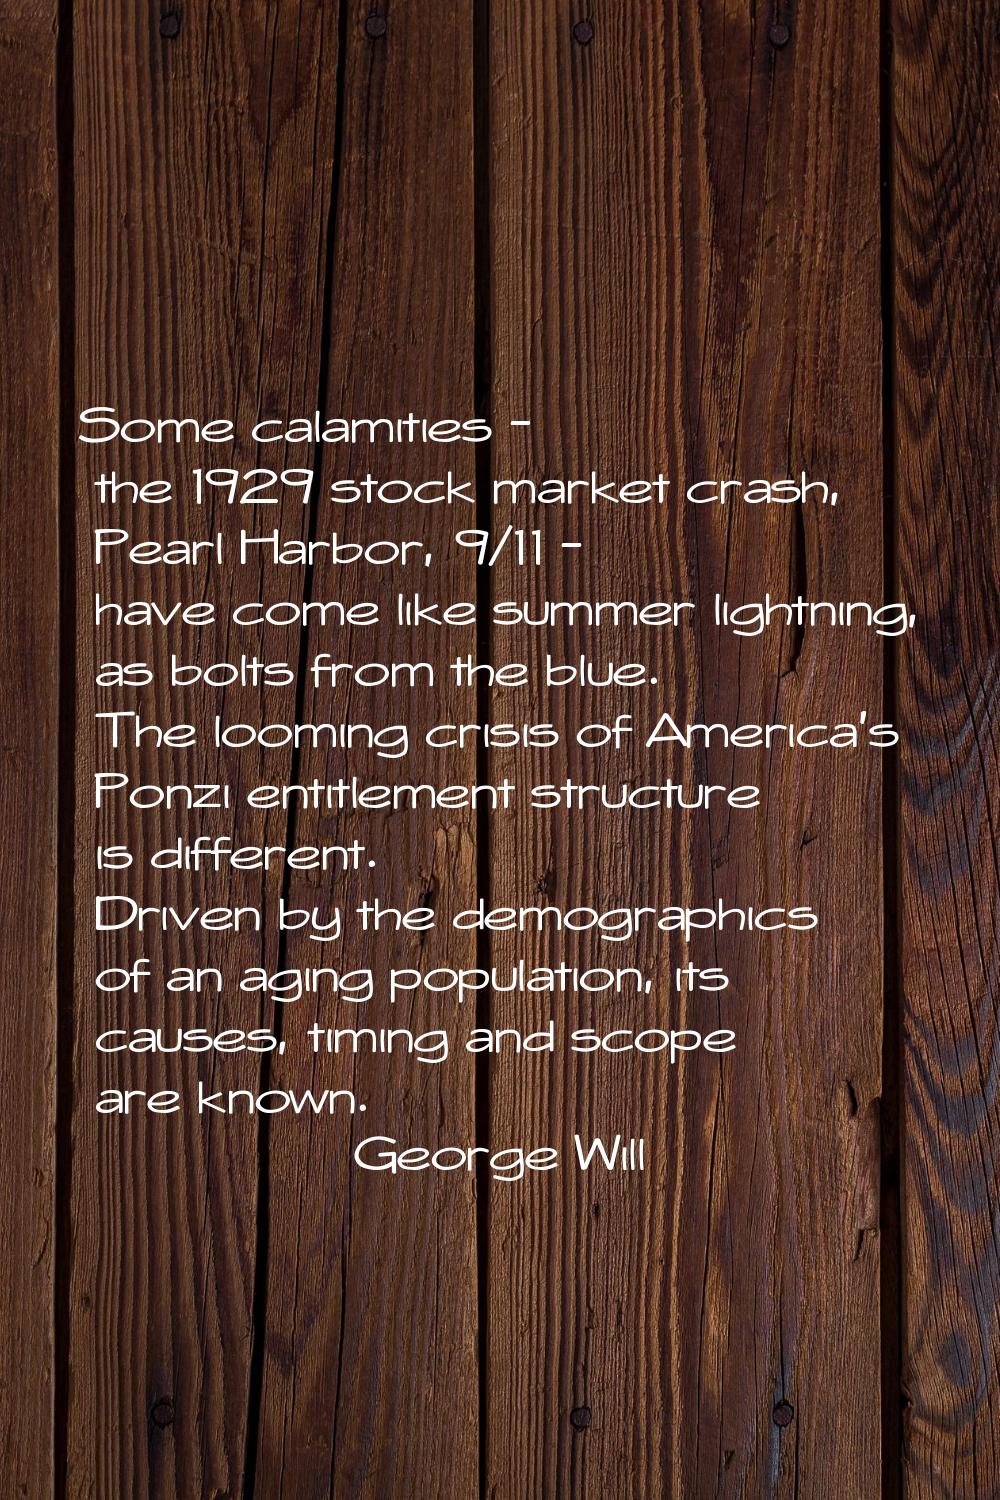 Some calamities - the 1929 stock market crash, Pearl Harbor, 9/11 - have come like summer lightning